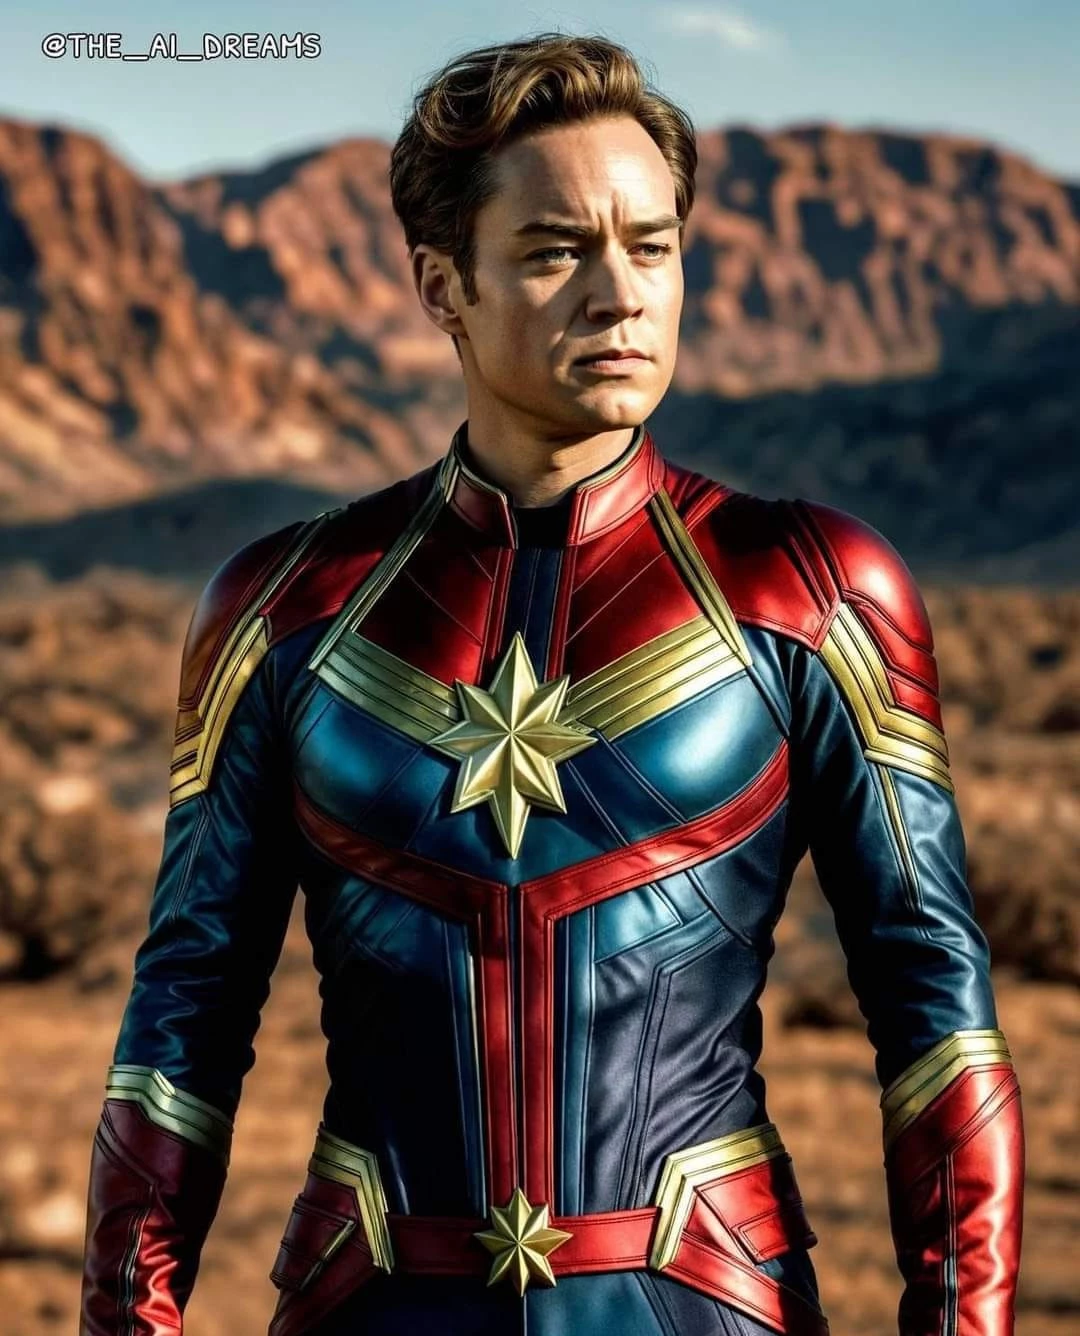 The Male Version Of Captain Marvel, Carlos Danvers